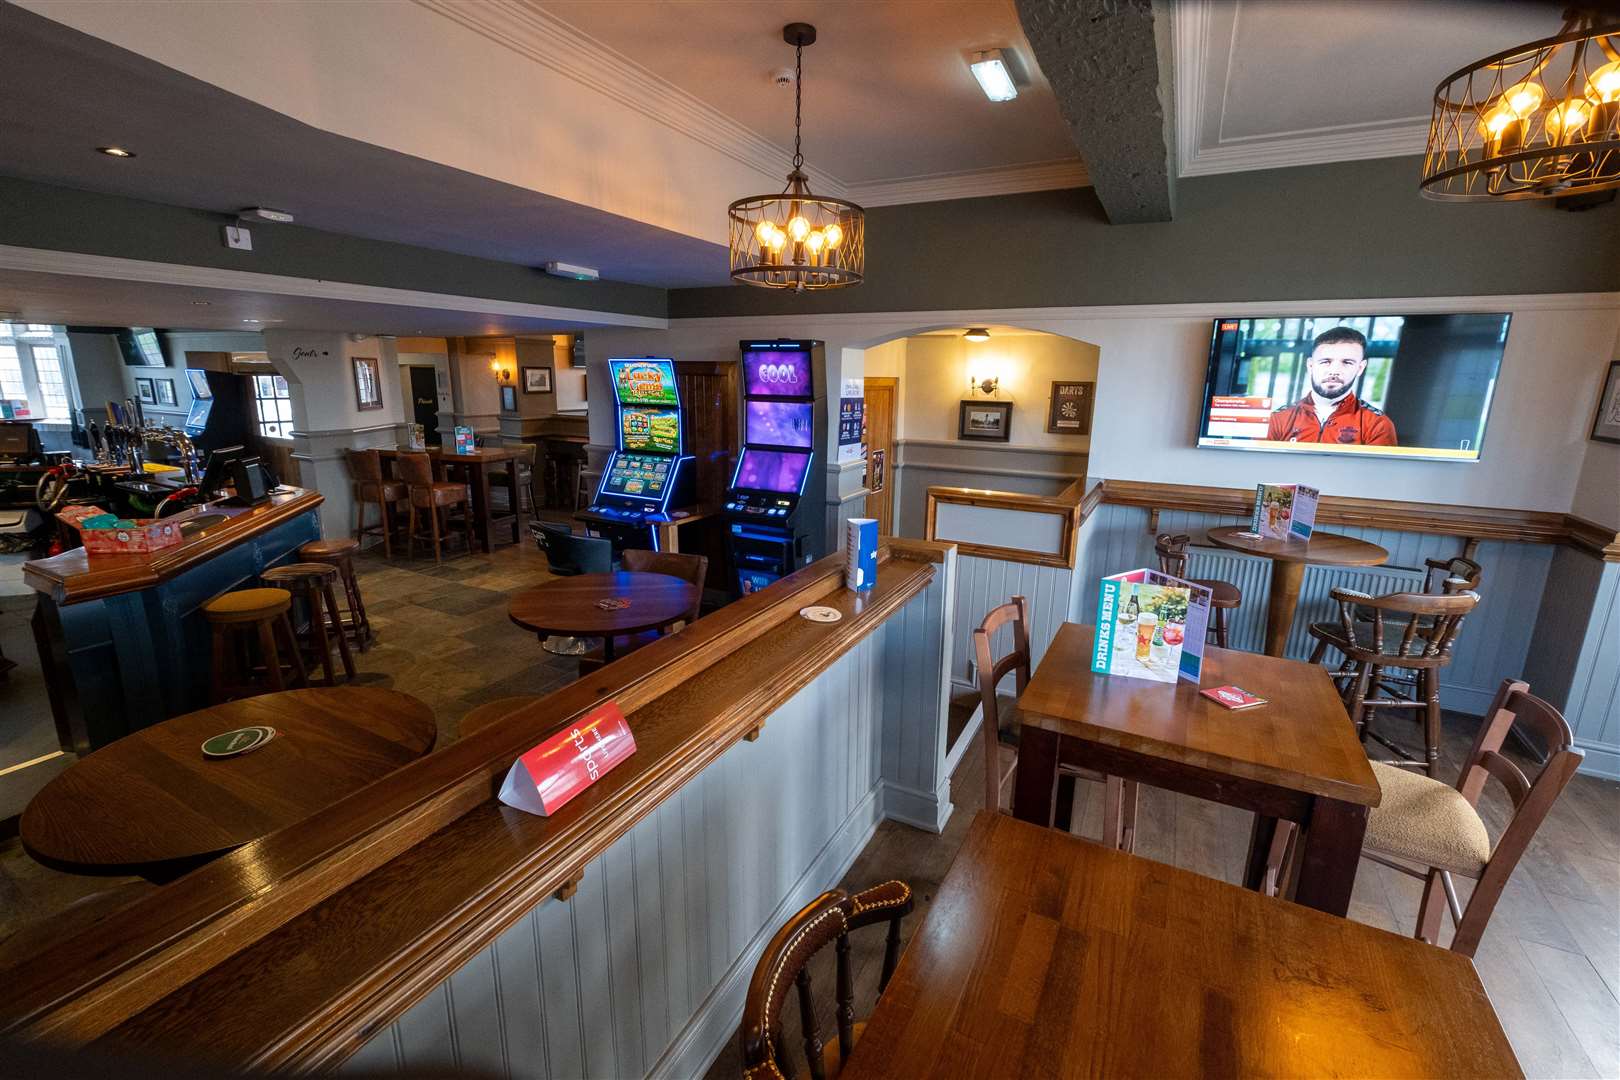 The Ship, Worsbrough, Barnsley, South Yorkshire, is among the pubs receiving investment (Star Pubs/PA)